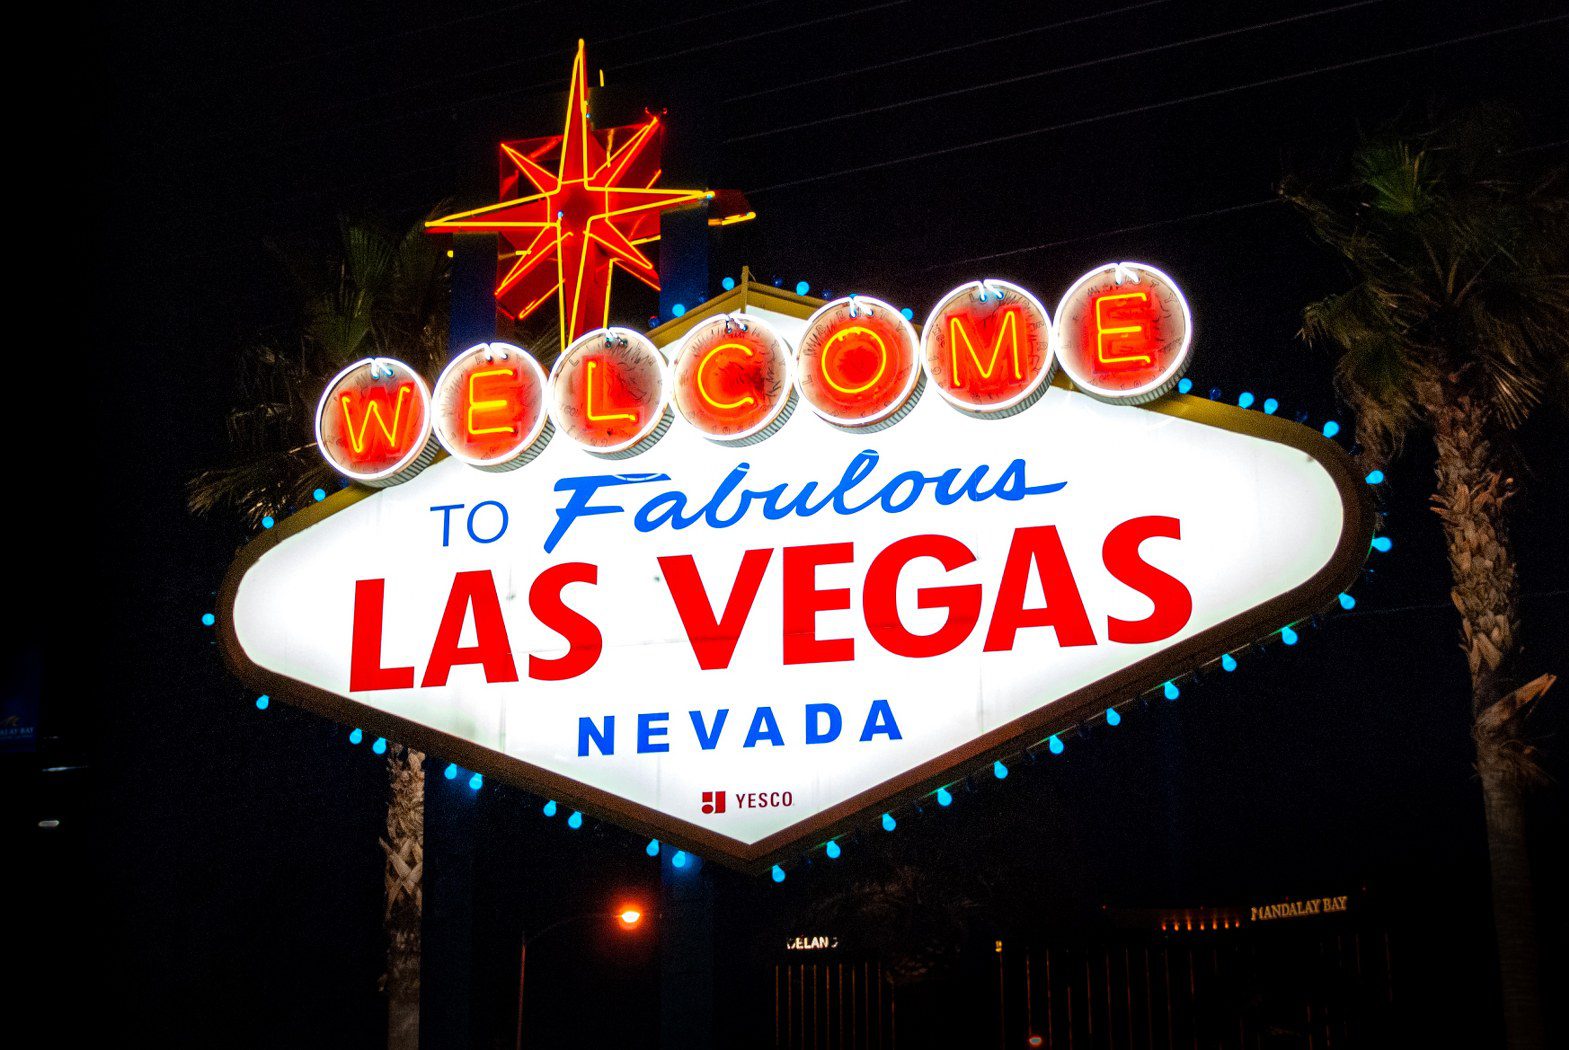 image of a welcome to las vegas sign indicating a las vegas answering service